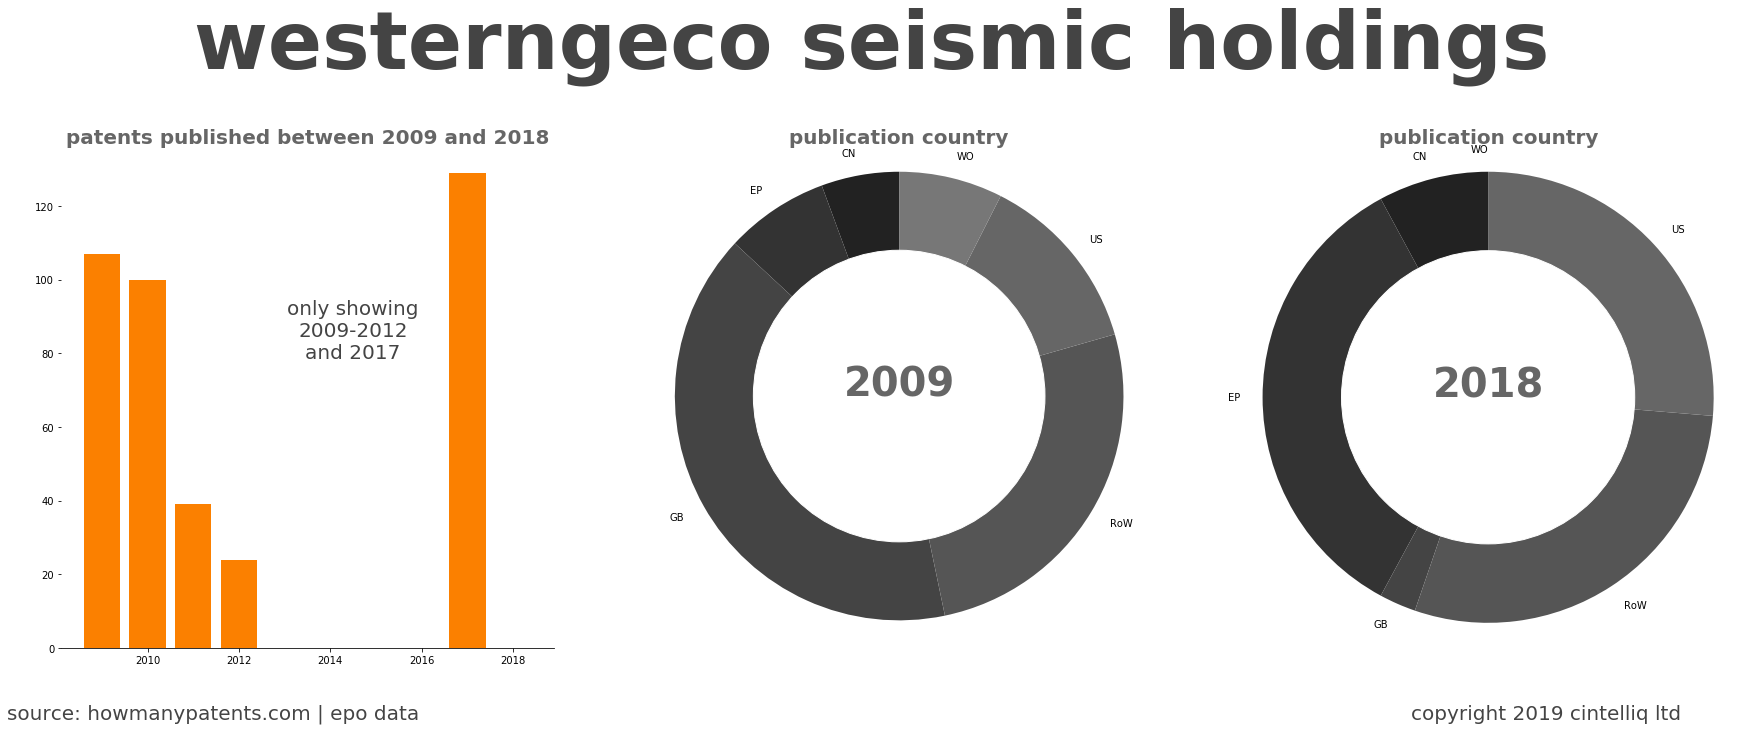 summary of patents for Westerngeco Seismic Holdings